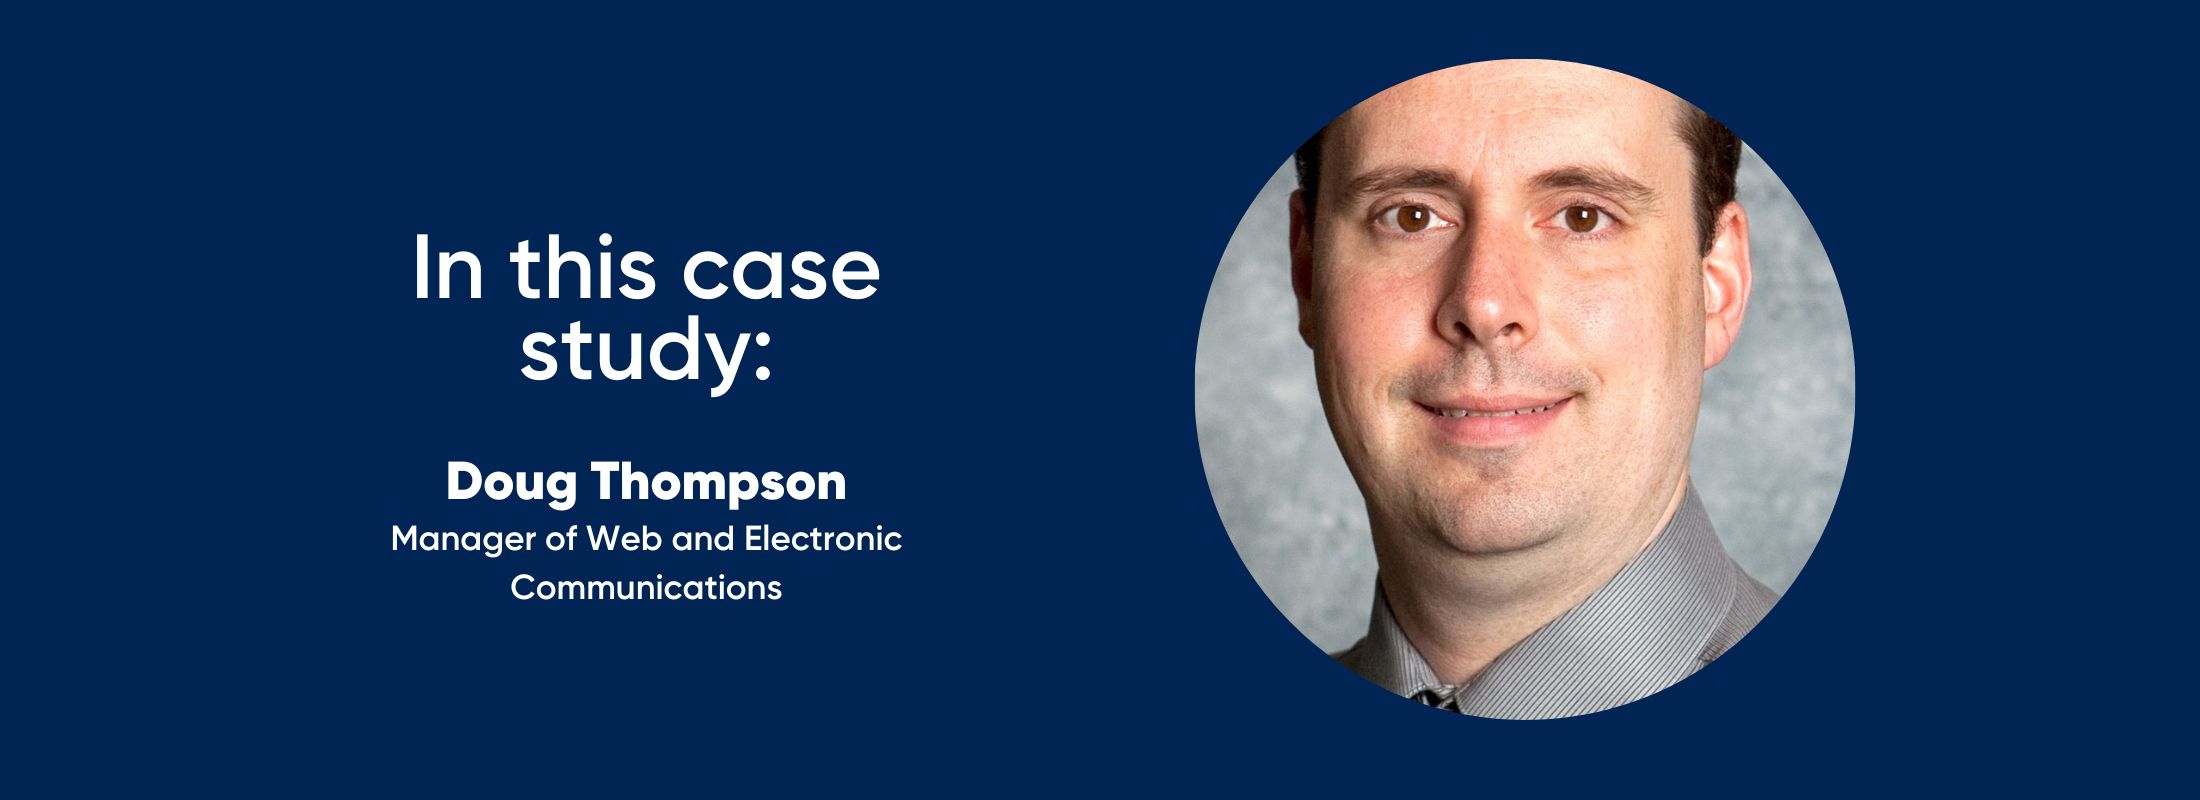 in this case study: Doug Thompson - Manager of Web and Electronic Communications